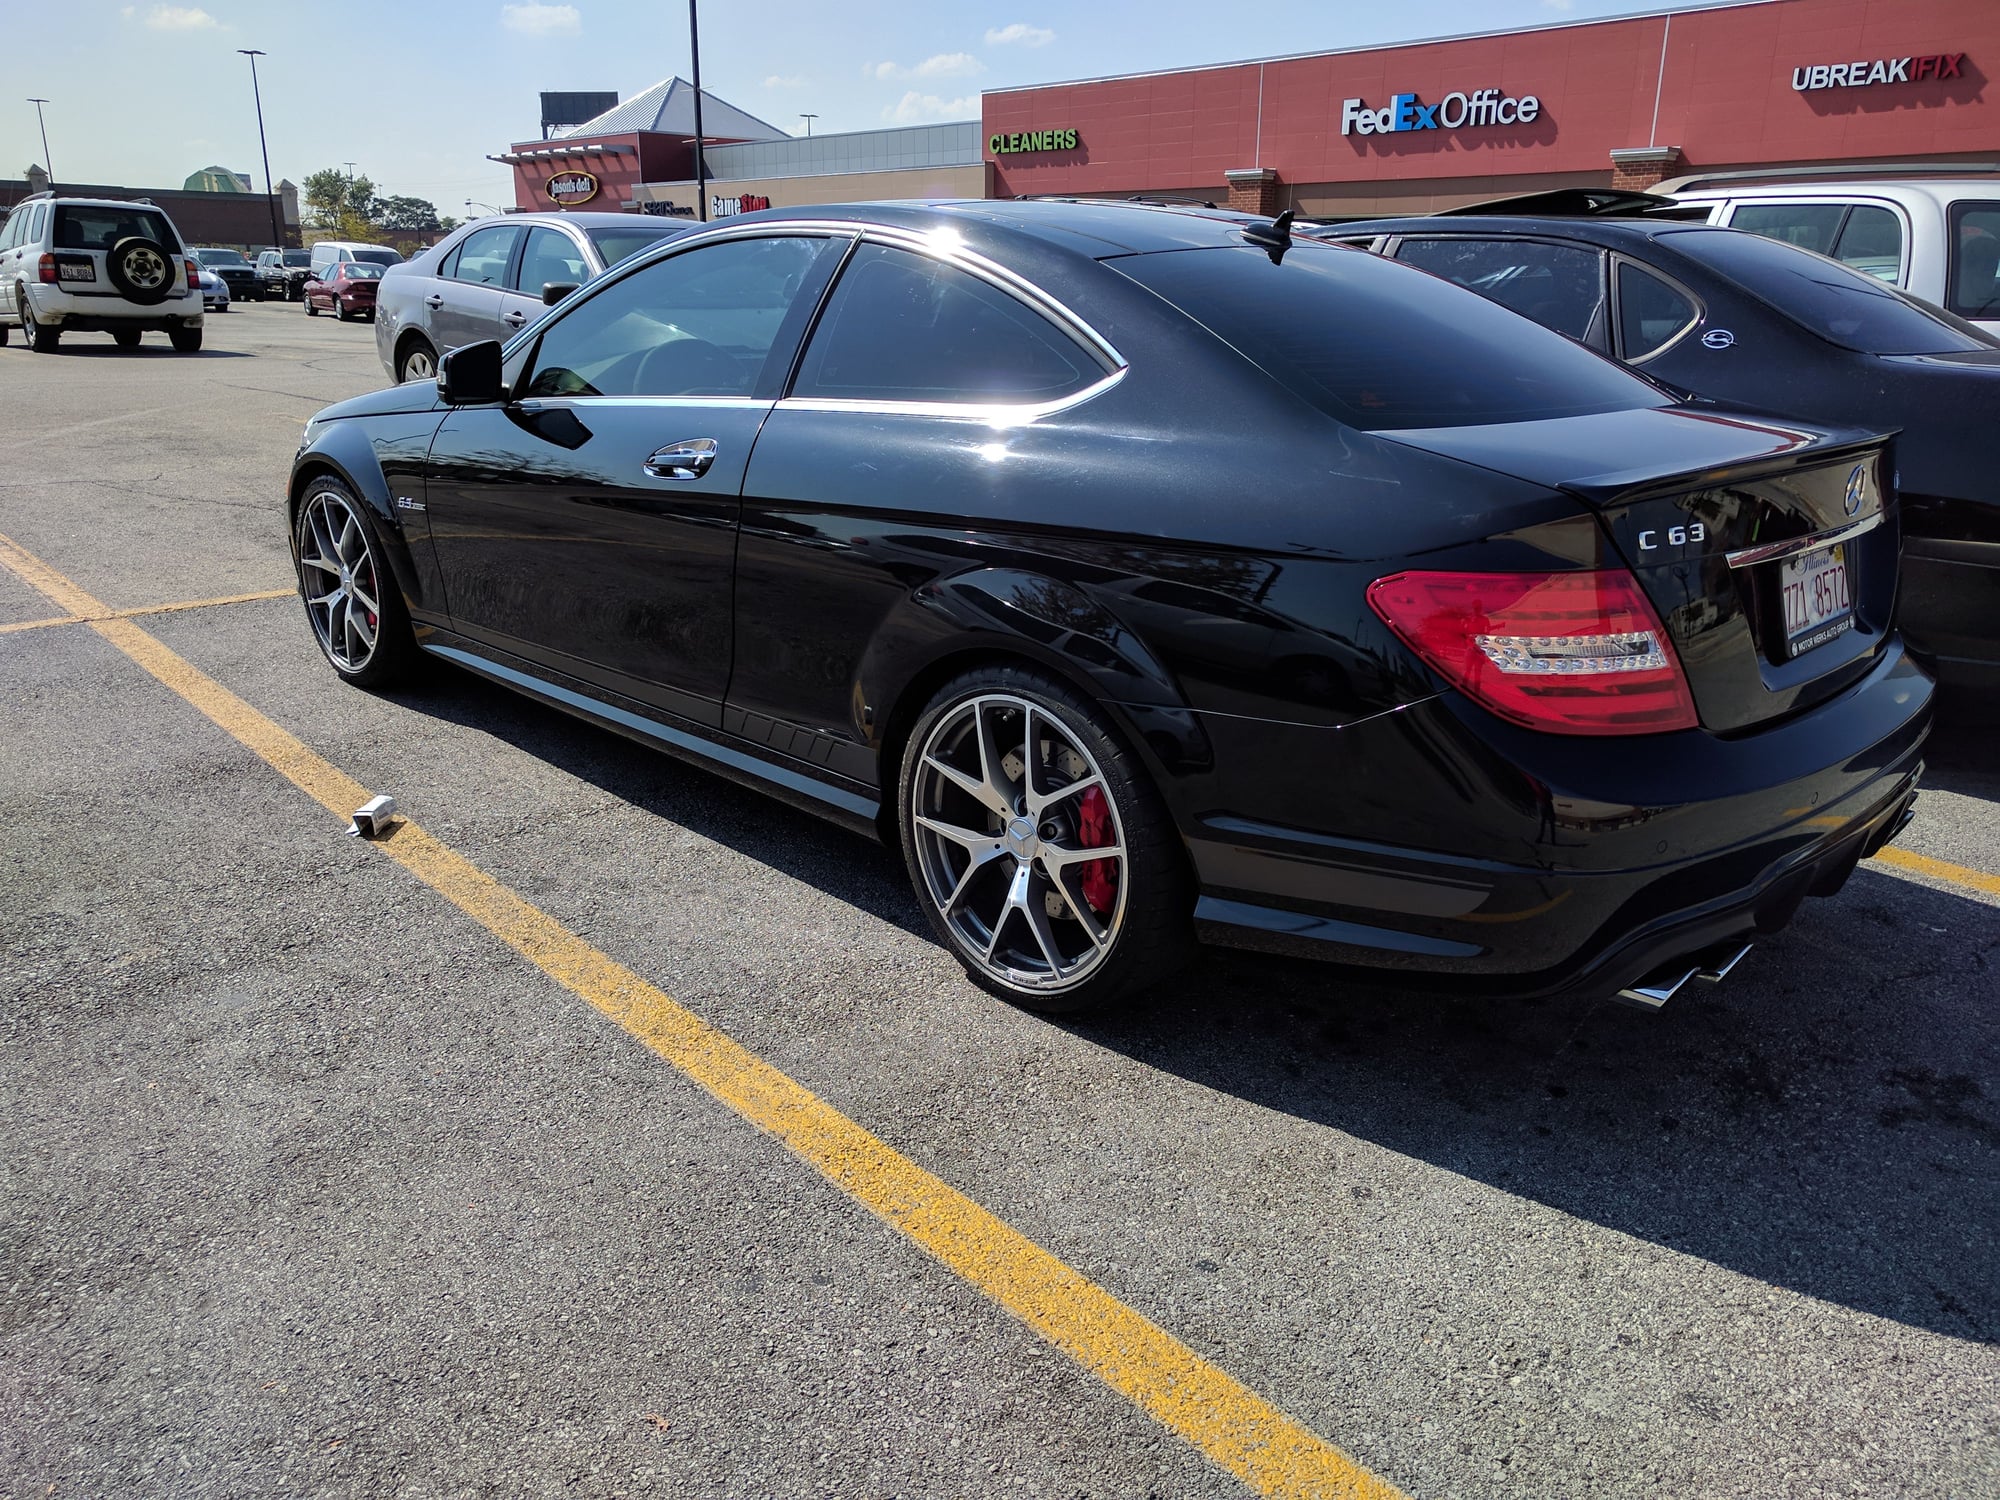 2014 Mercedes-Benz C63 AMG - 2014 Mercedes Benz C63 507 - Used - VIN WDDGJ7HB2EG171346 - 47,000 Miles - 8 cyl - 2WD - Automatic - Coupe - Black - Chicago, IL 60661, United States